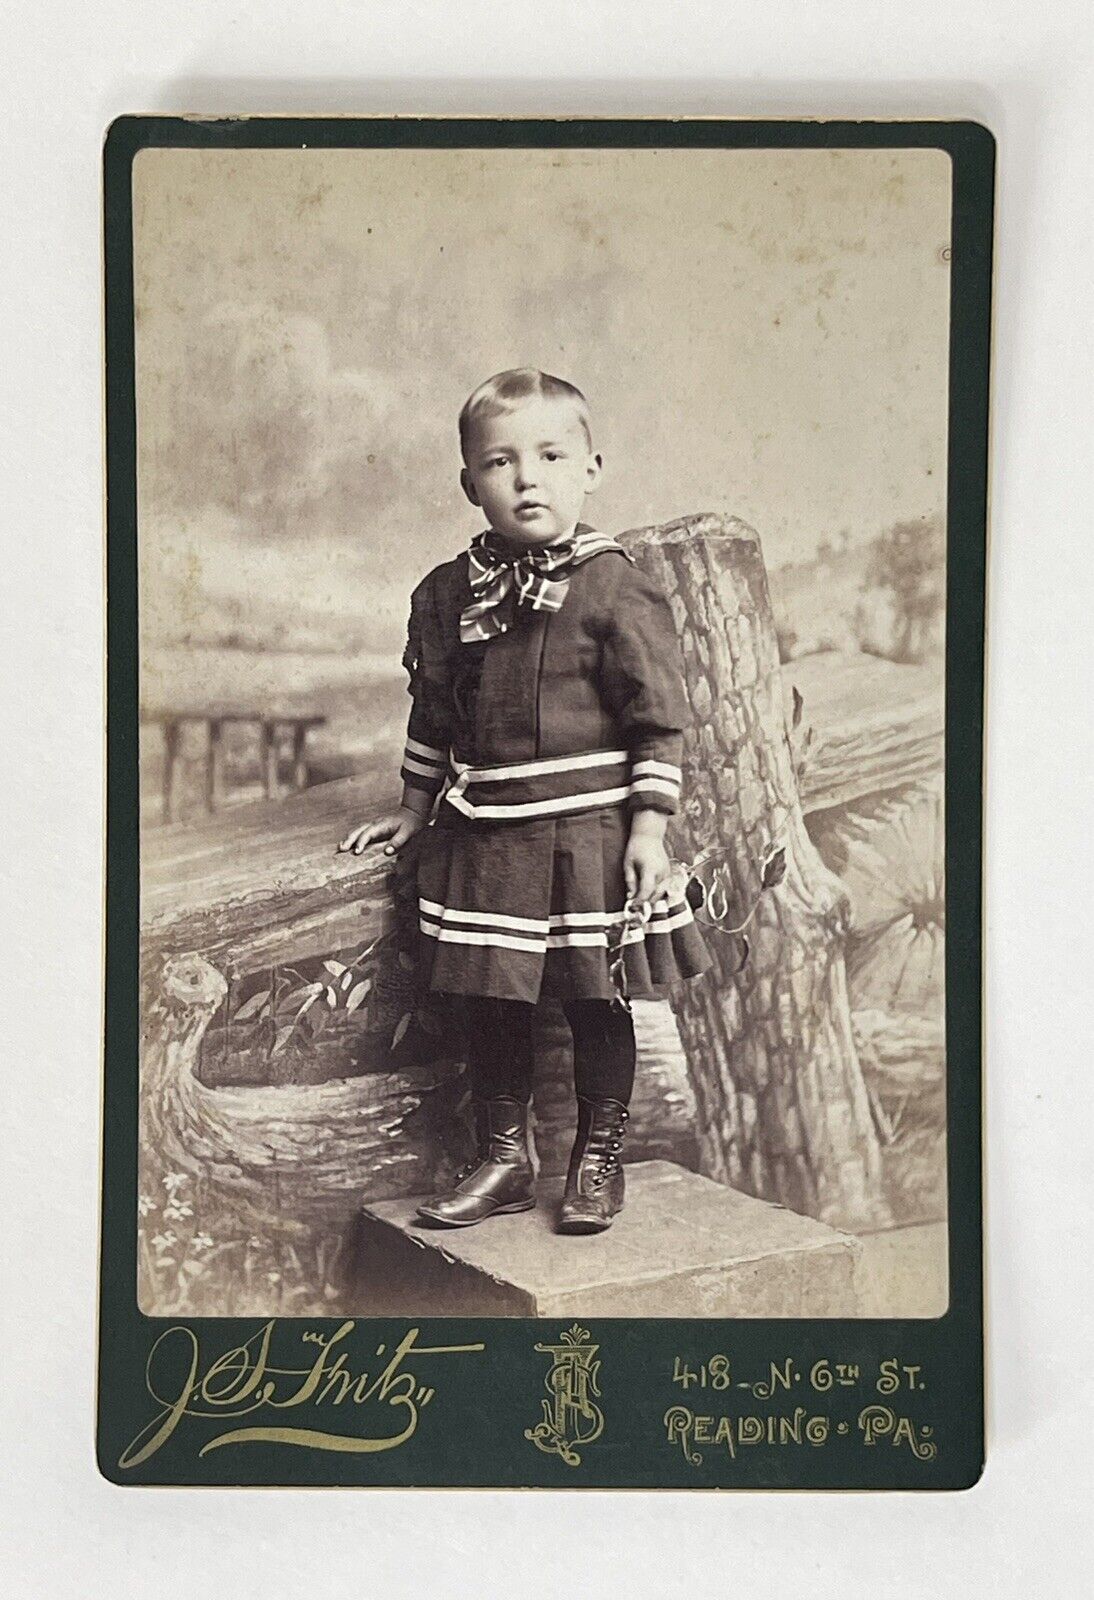 Antique Victorian Cabinet Card Photo Of Young Boy Child Reading, PA